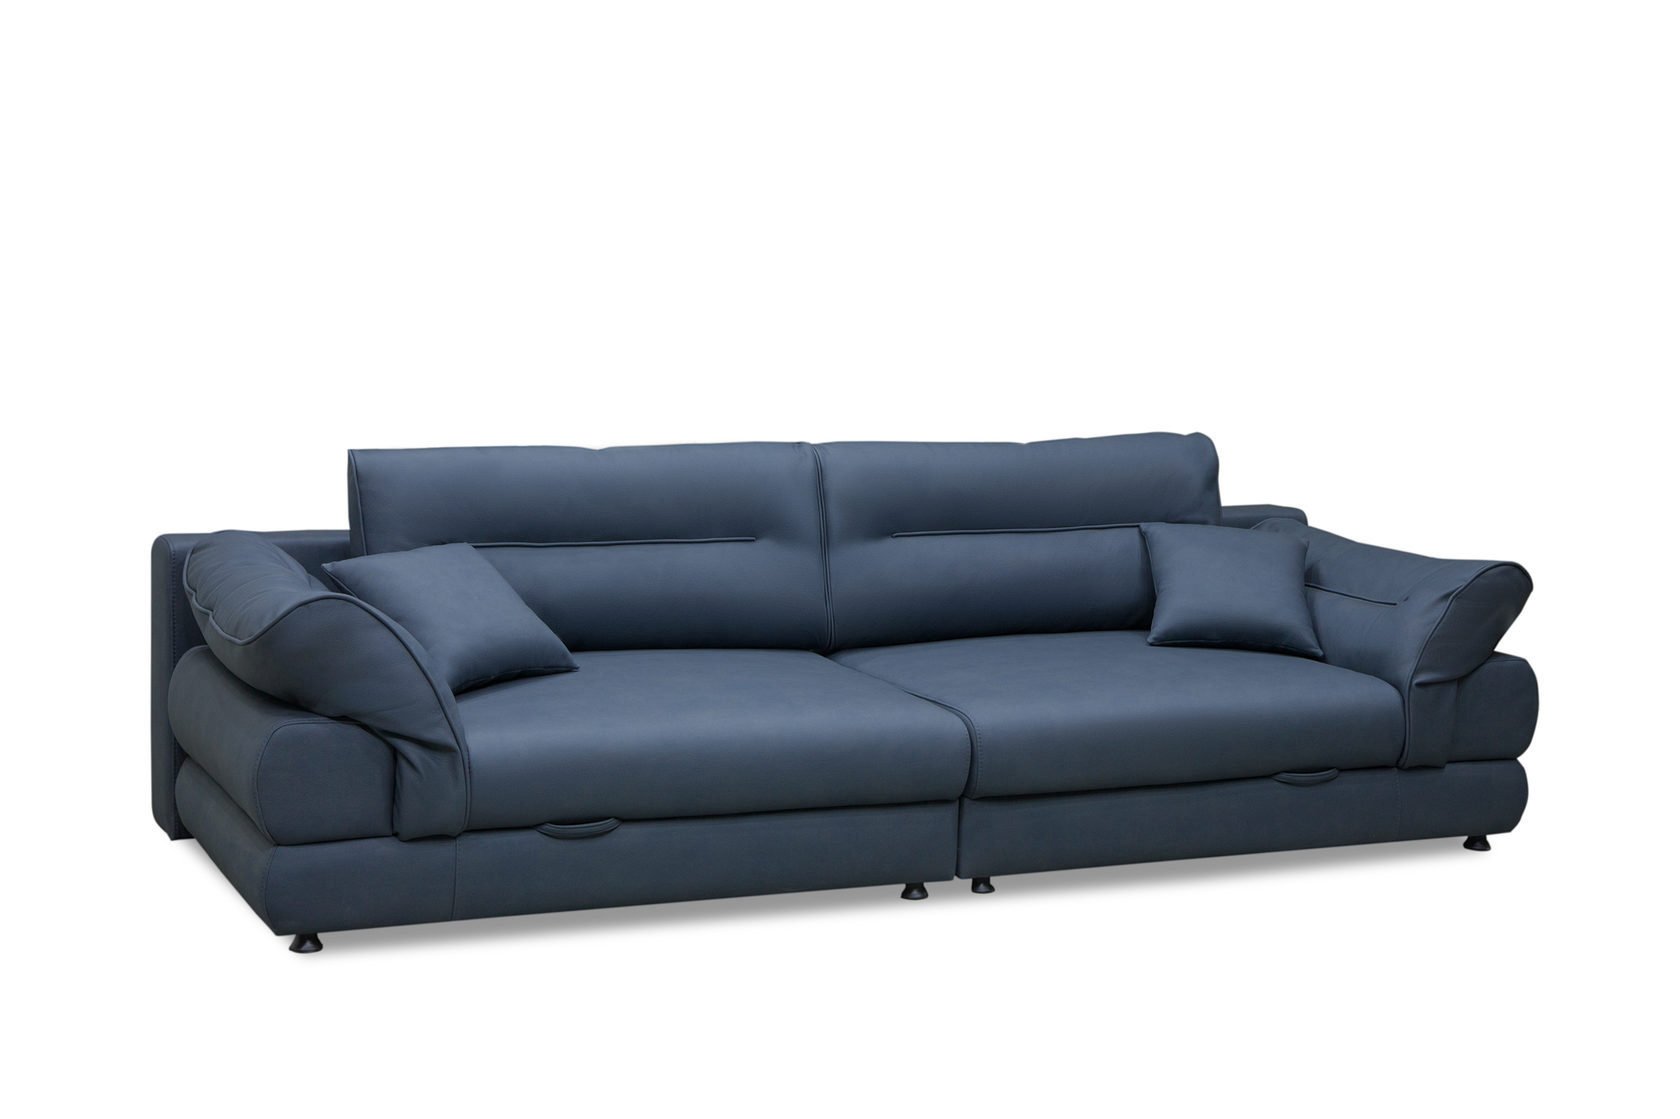 Floor Sample Macao Blue Queen Sofa Bed With Storage by Prestige Furnishings